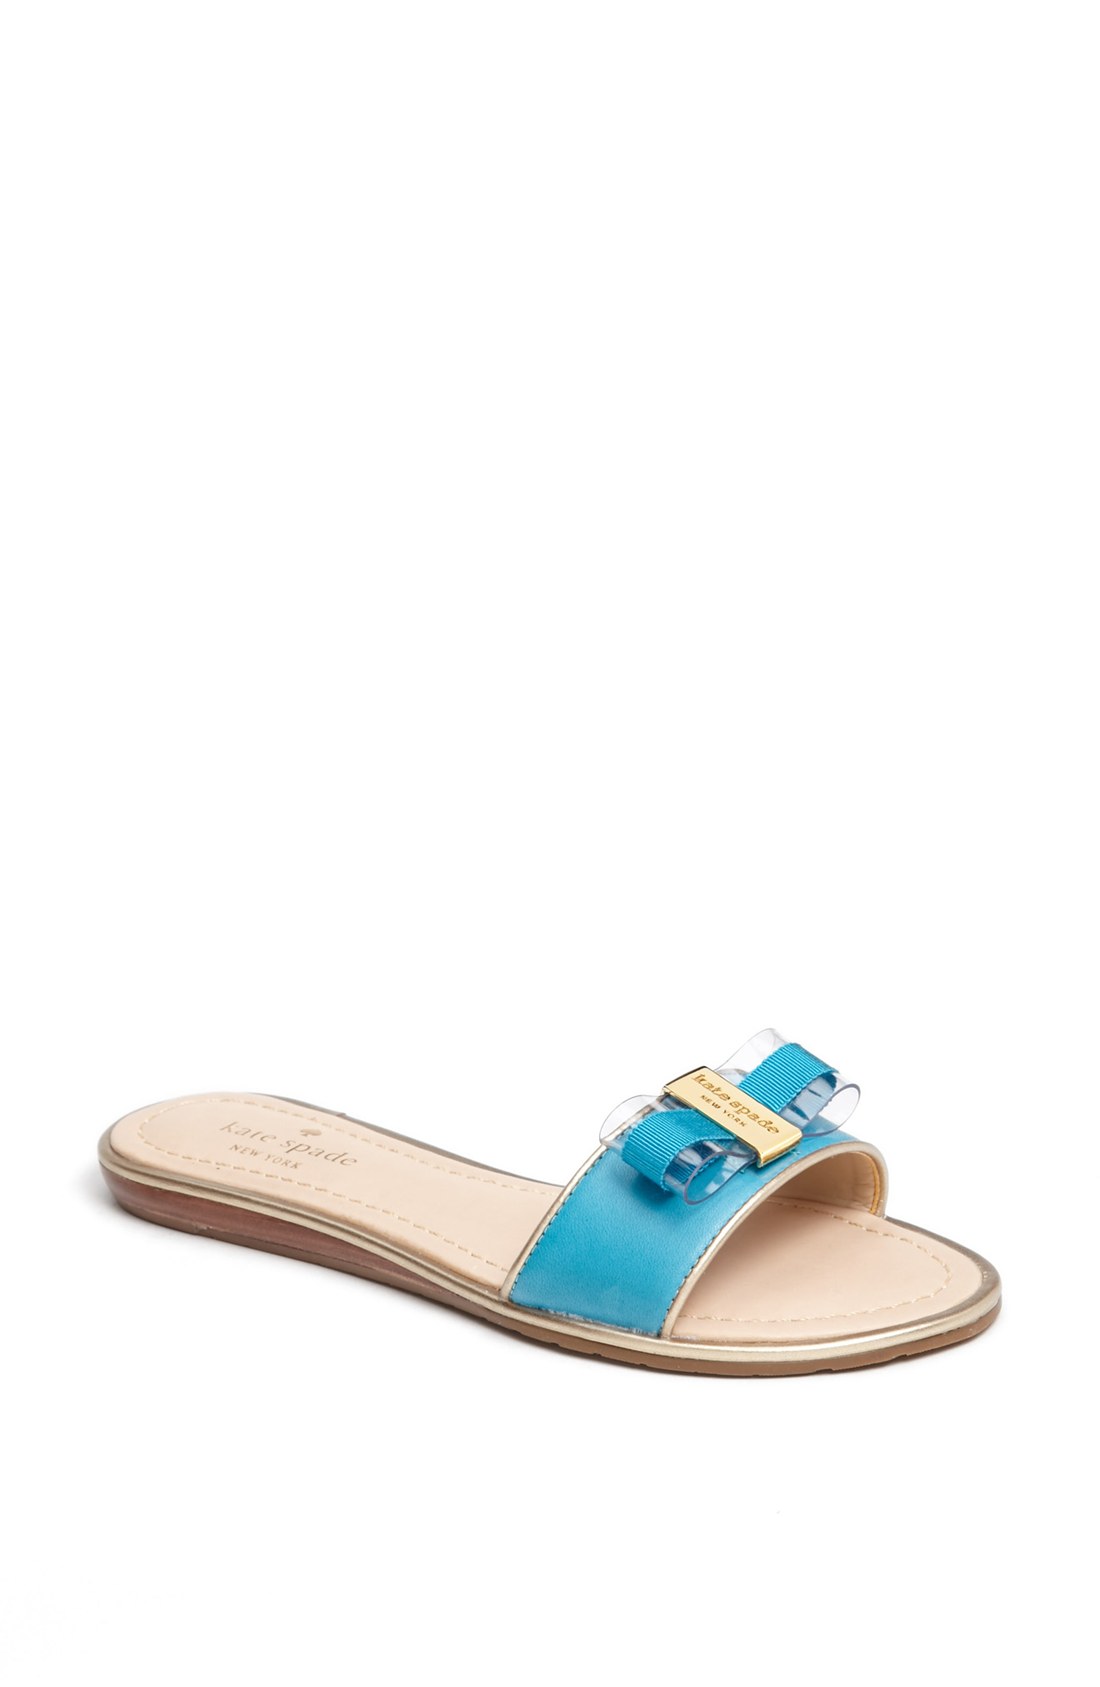 Kate Spade Alicia Sandal in Blue (Turquoise Vacchetta) | Lyst